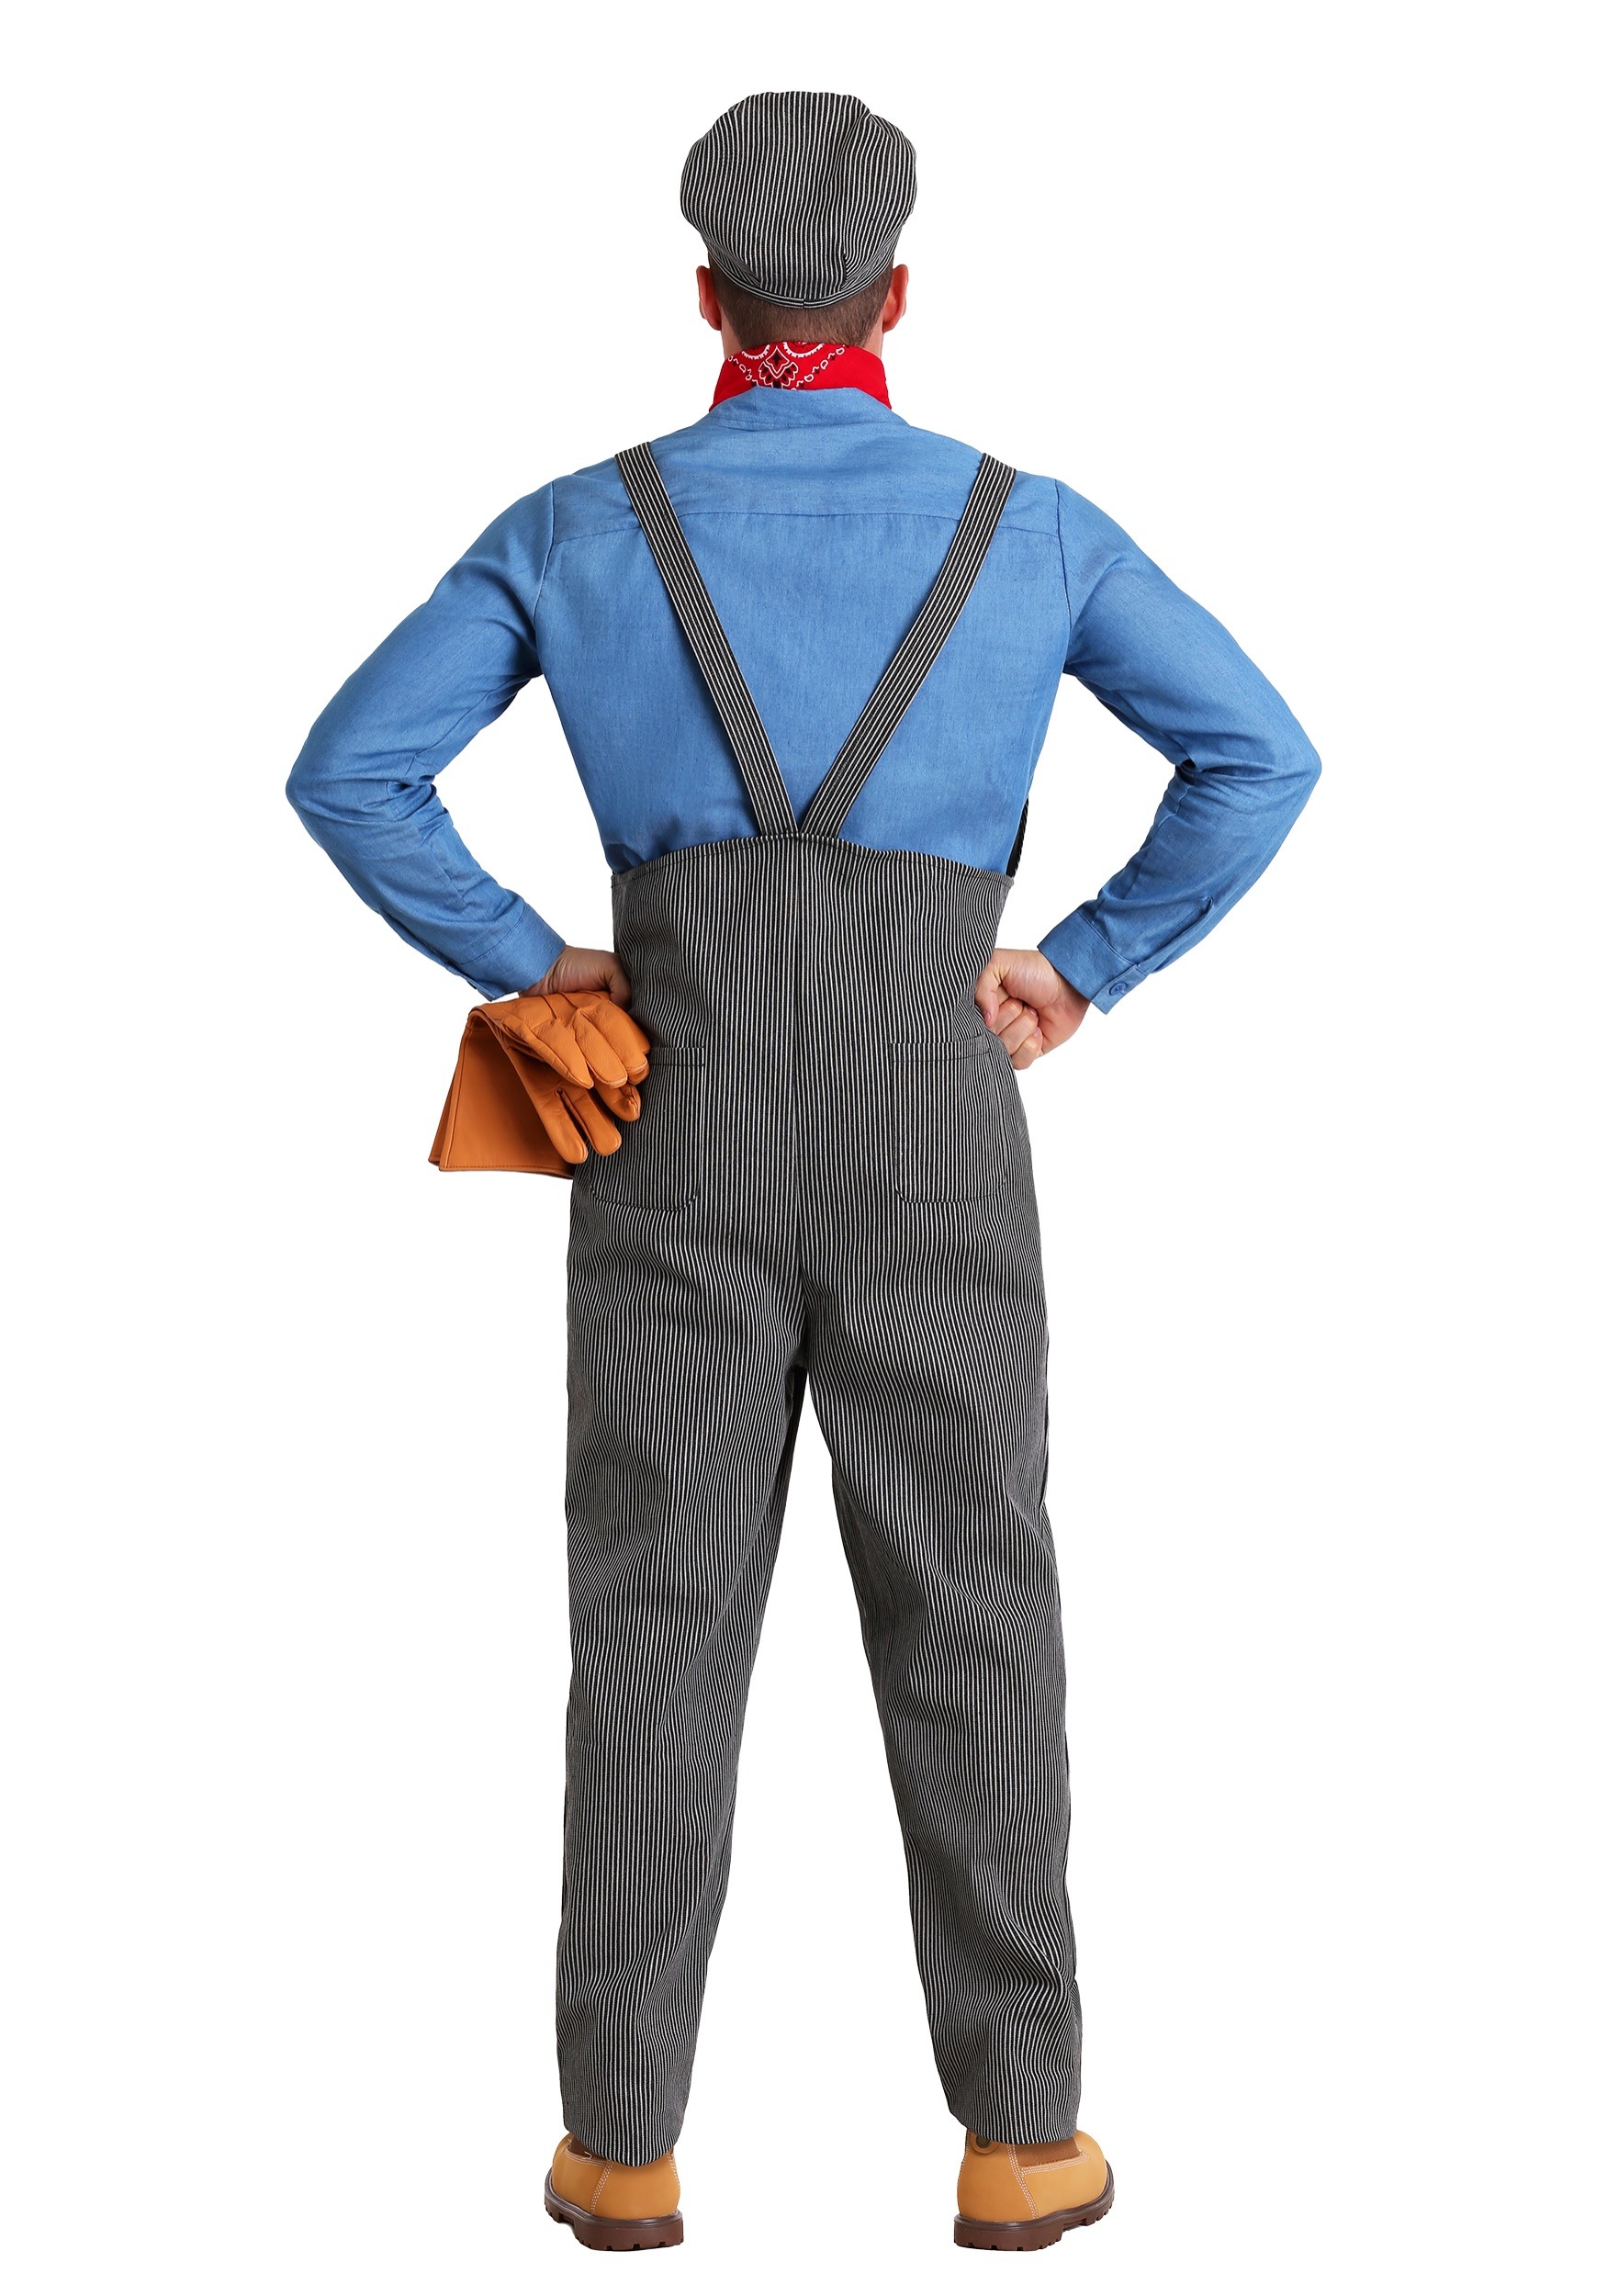 Train Engineer Costume For Adults